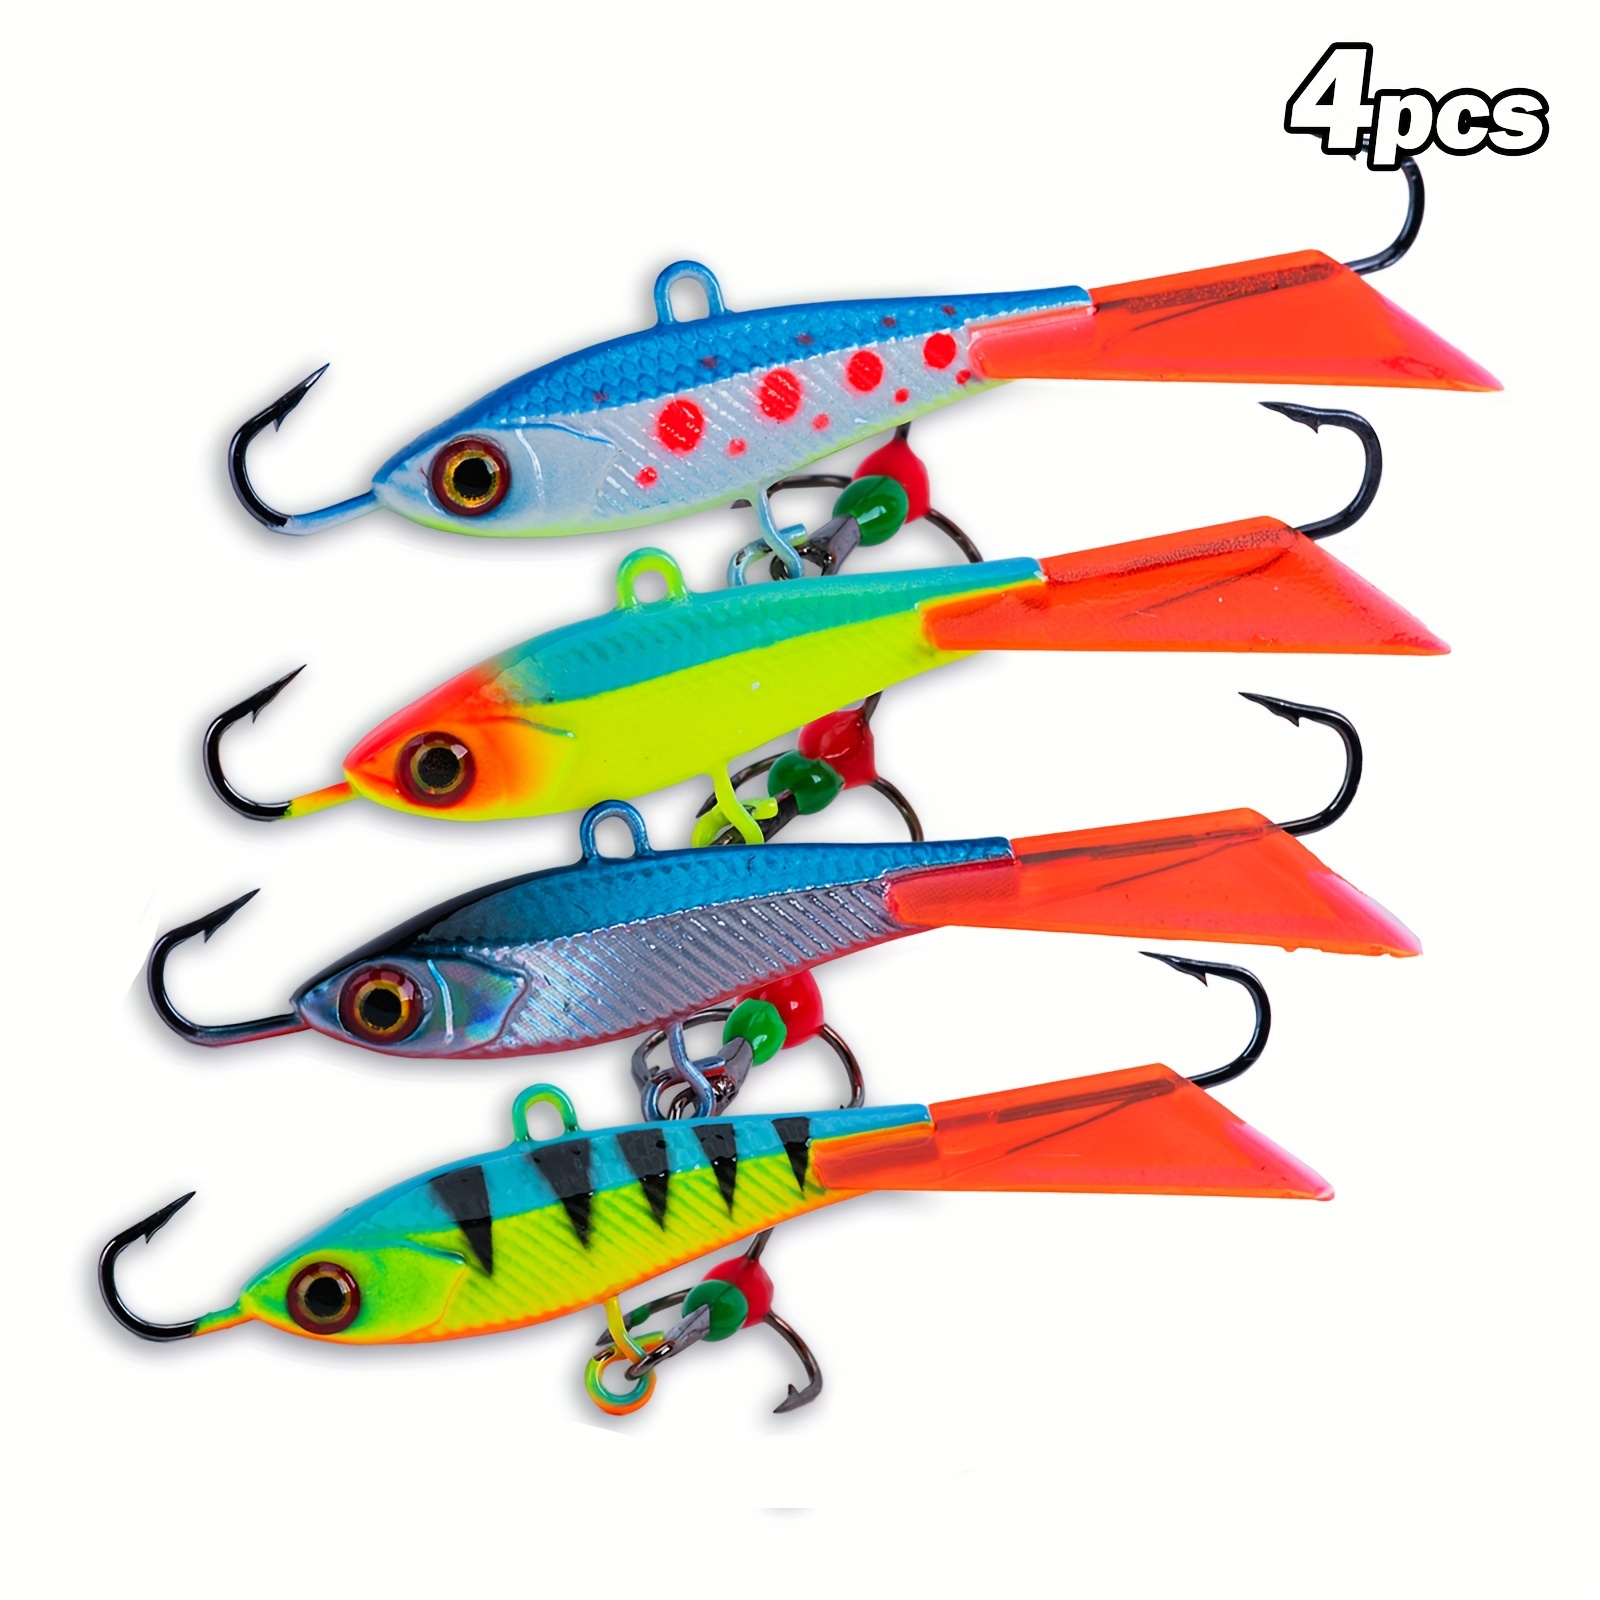 Goture Ice Jigging Fishing Lure, Ice Fishing Lures Trout